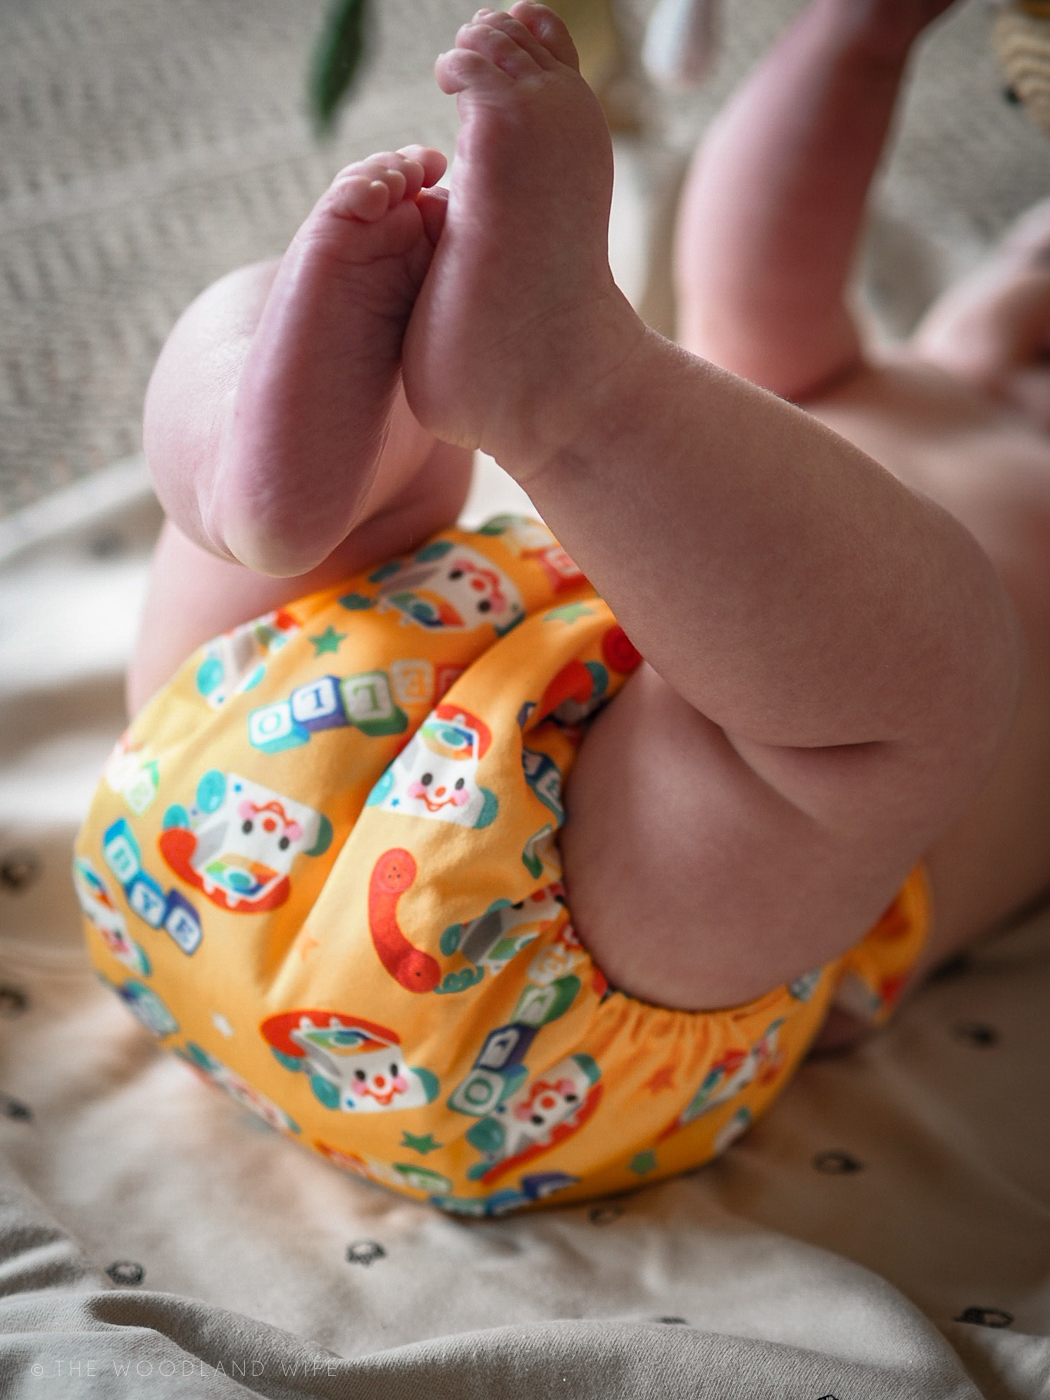 The Woodland Wife 2019 - Reuseable Cloth Nappies - TotsBots